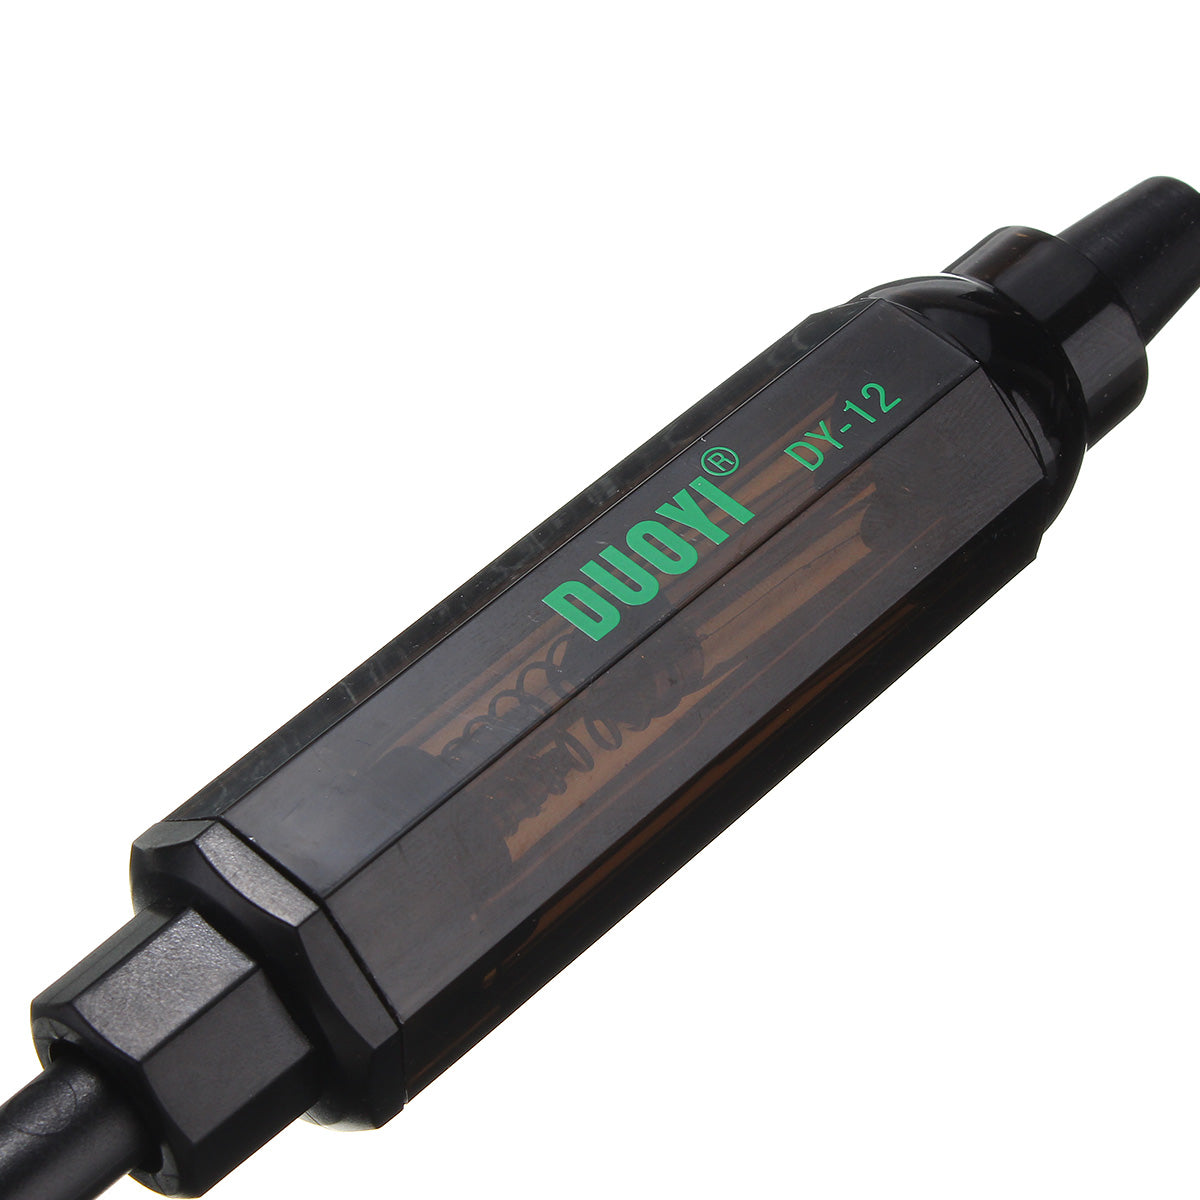 DOUYI DY12 Circuit Detection Tester Probe With Hook Type Probe Type Pen DC 6V/12V/24V Low Voltage - Auto GoShop